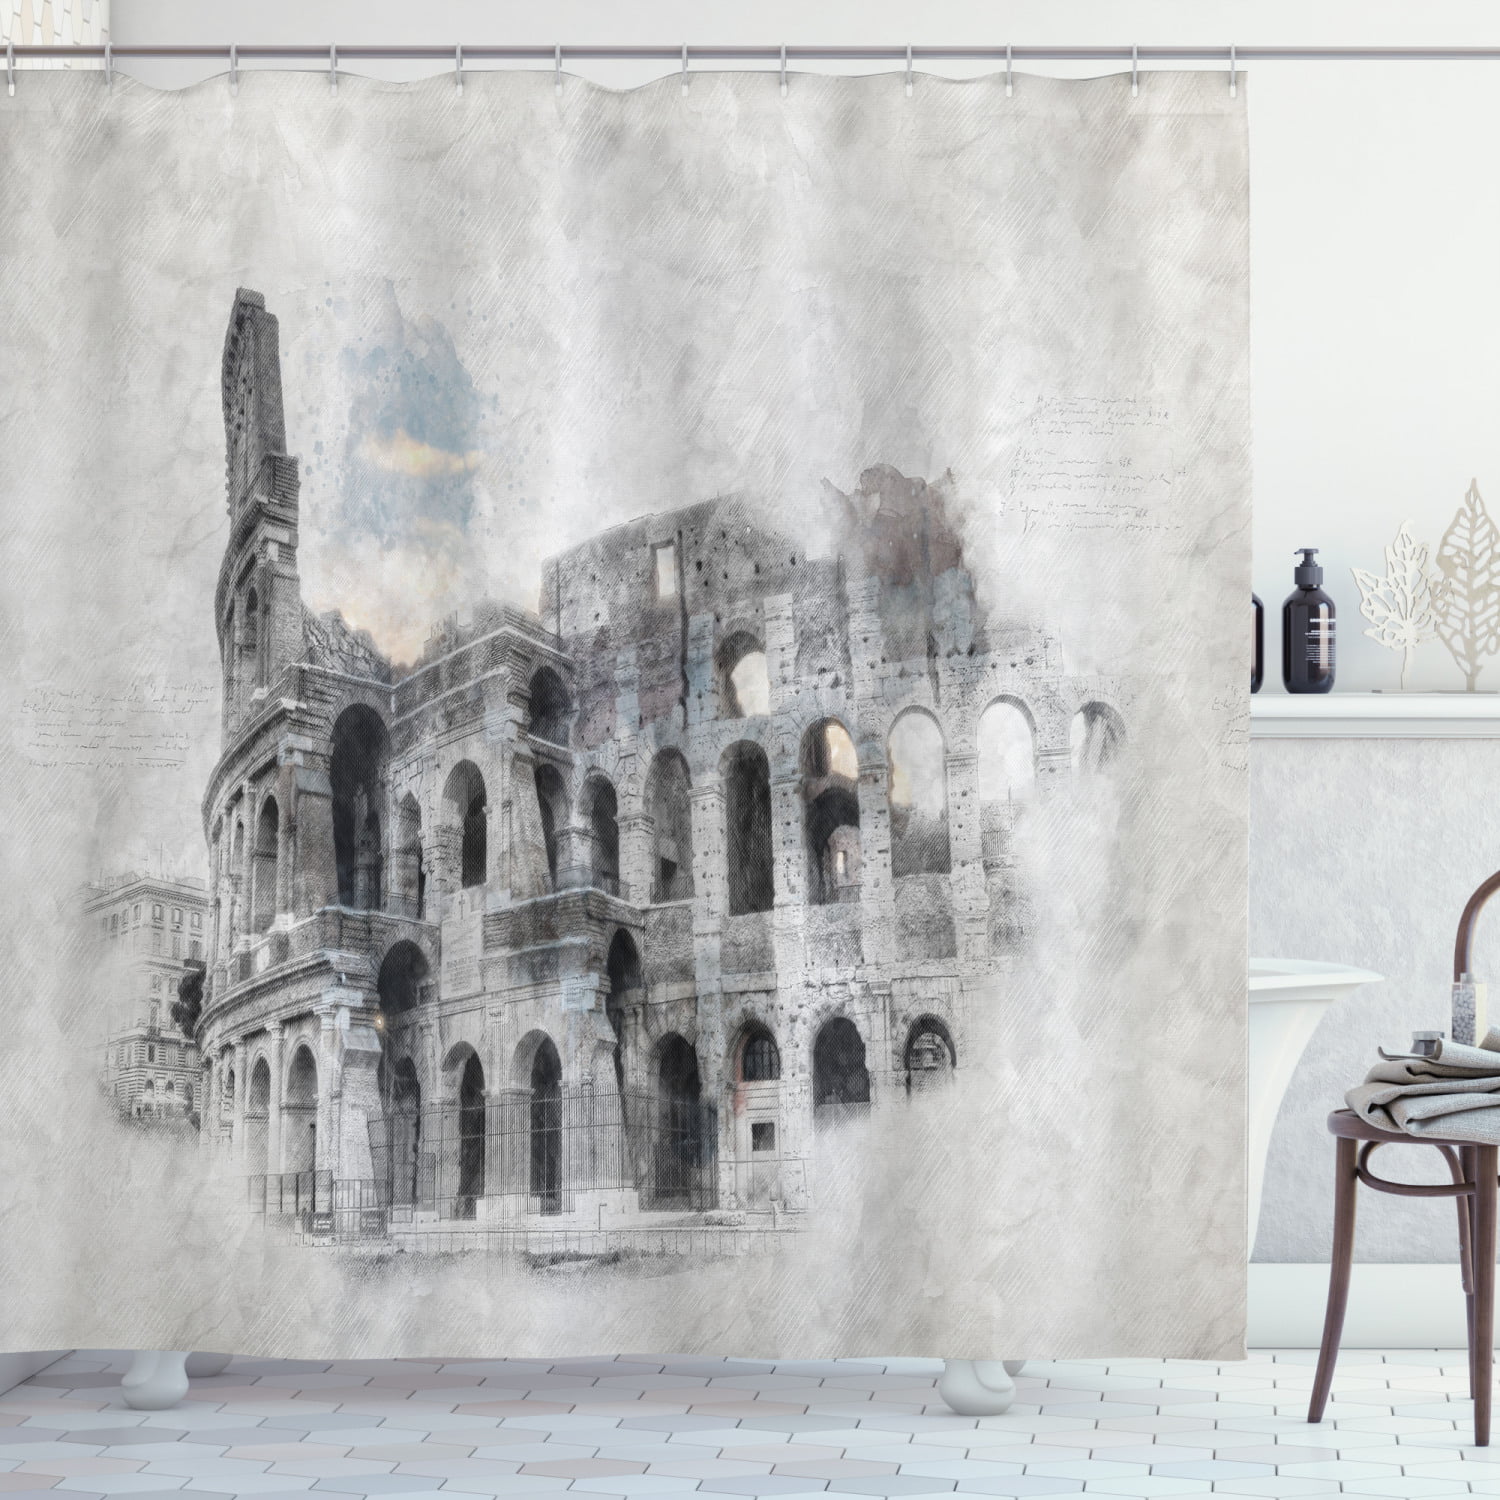 Details about   Rome Italy Style Waterproof Polyester Bathroom Shower Curtain With Free 12 Hooks 